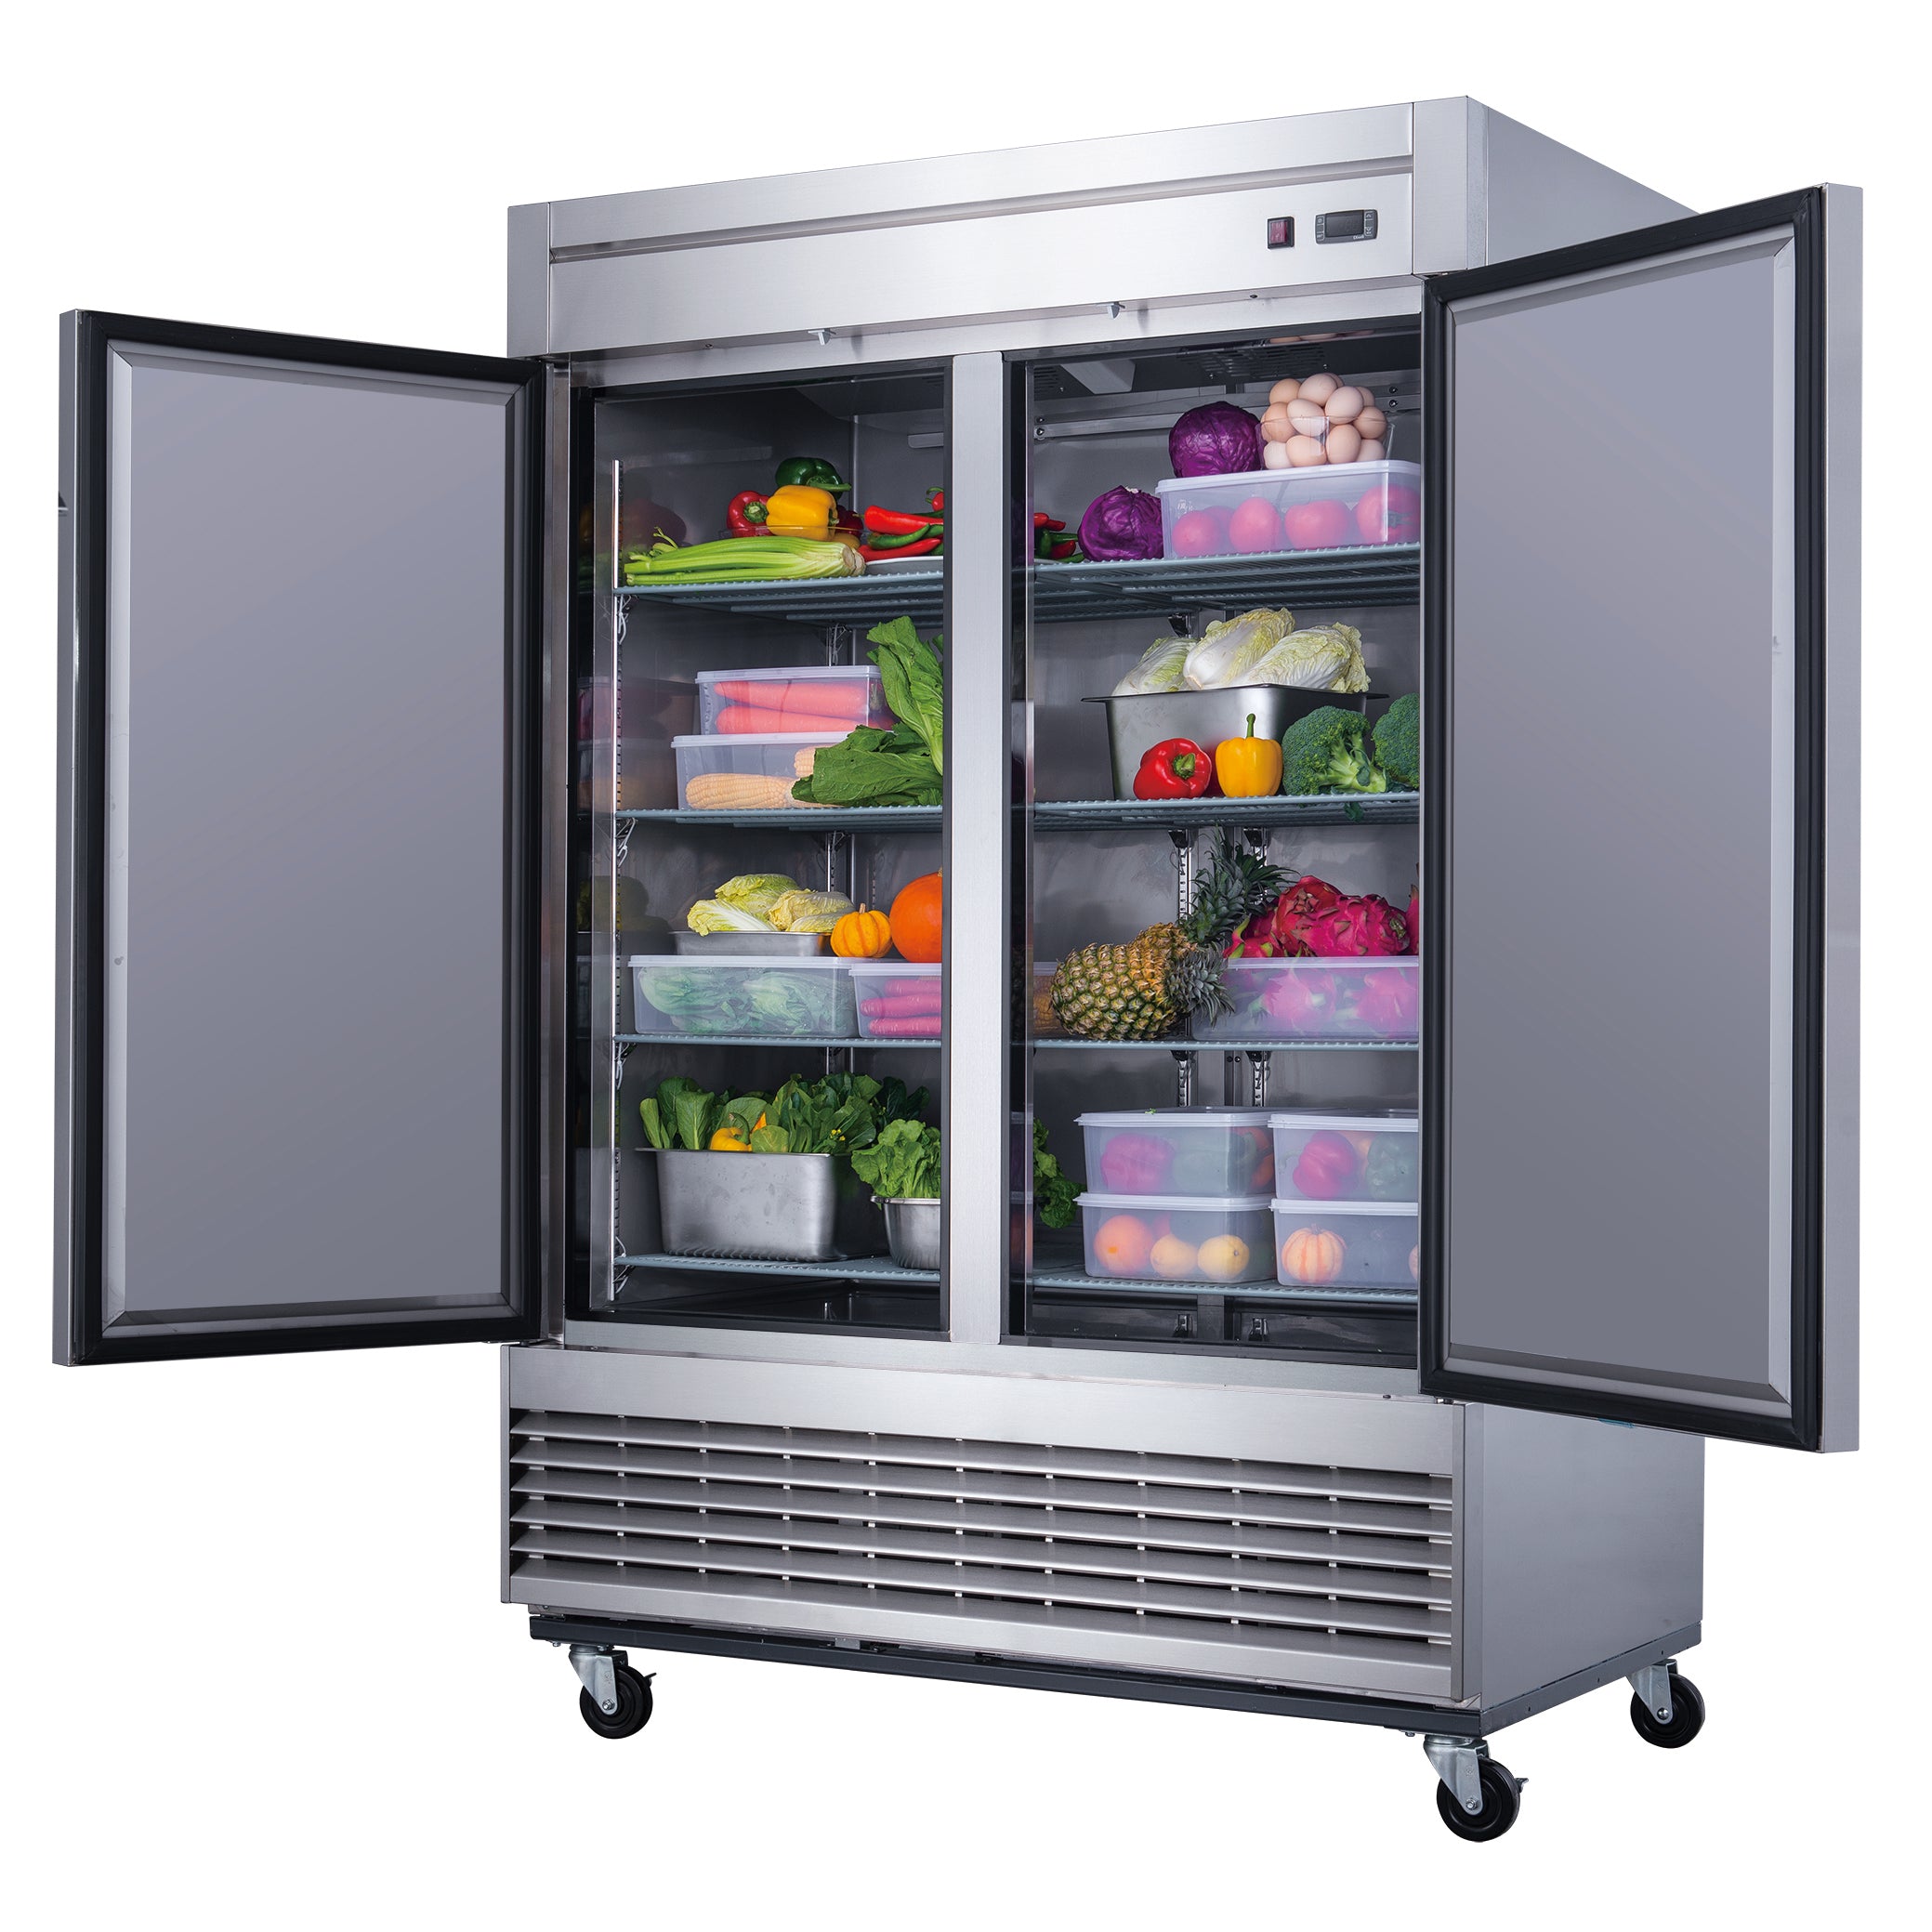 commercial-reach-in-refrigerator-commercial-kitchen-equipment-commercial-refrigerator